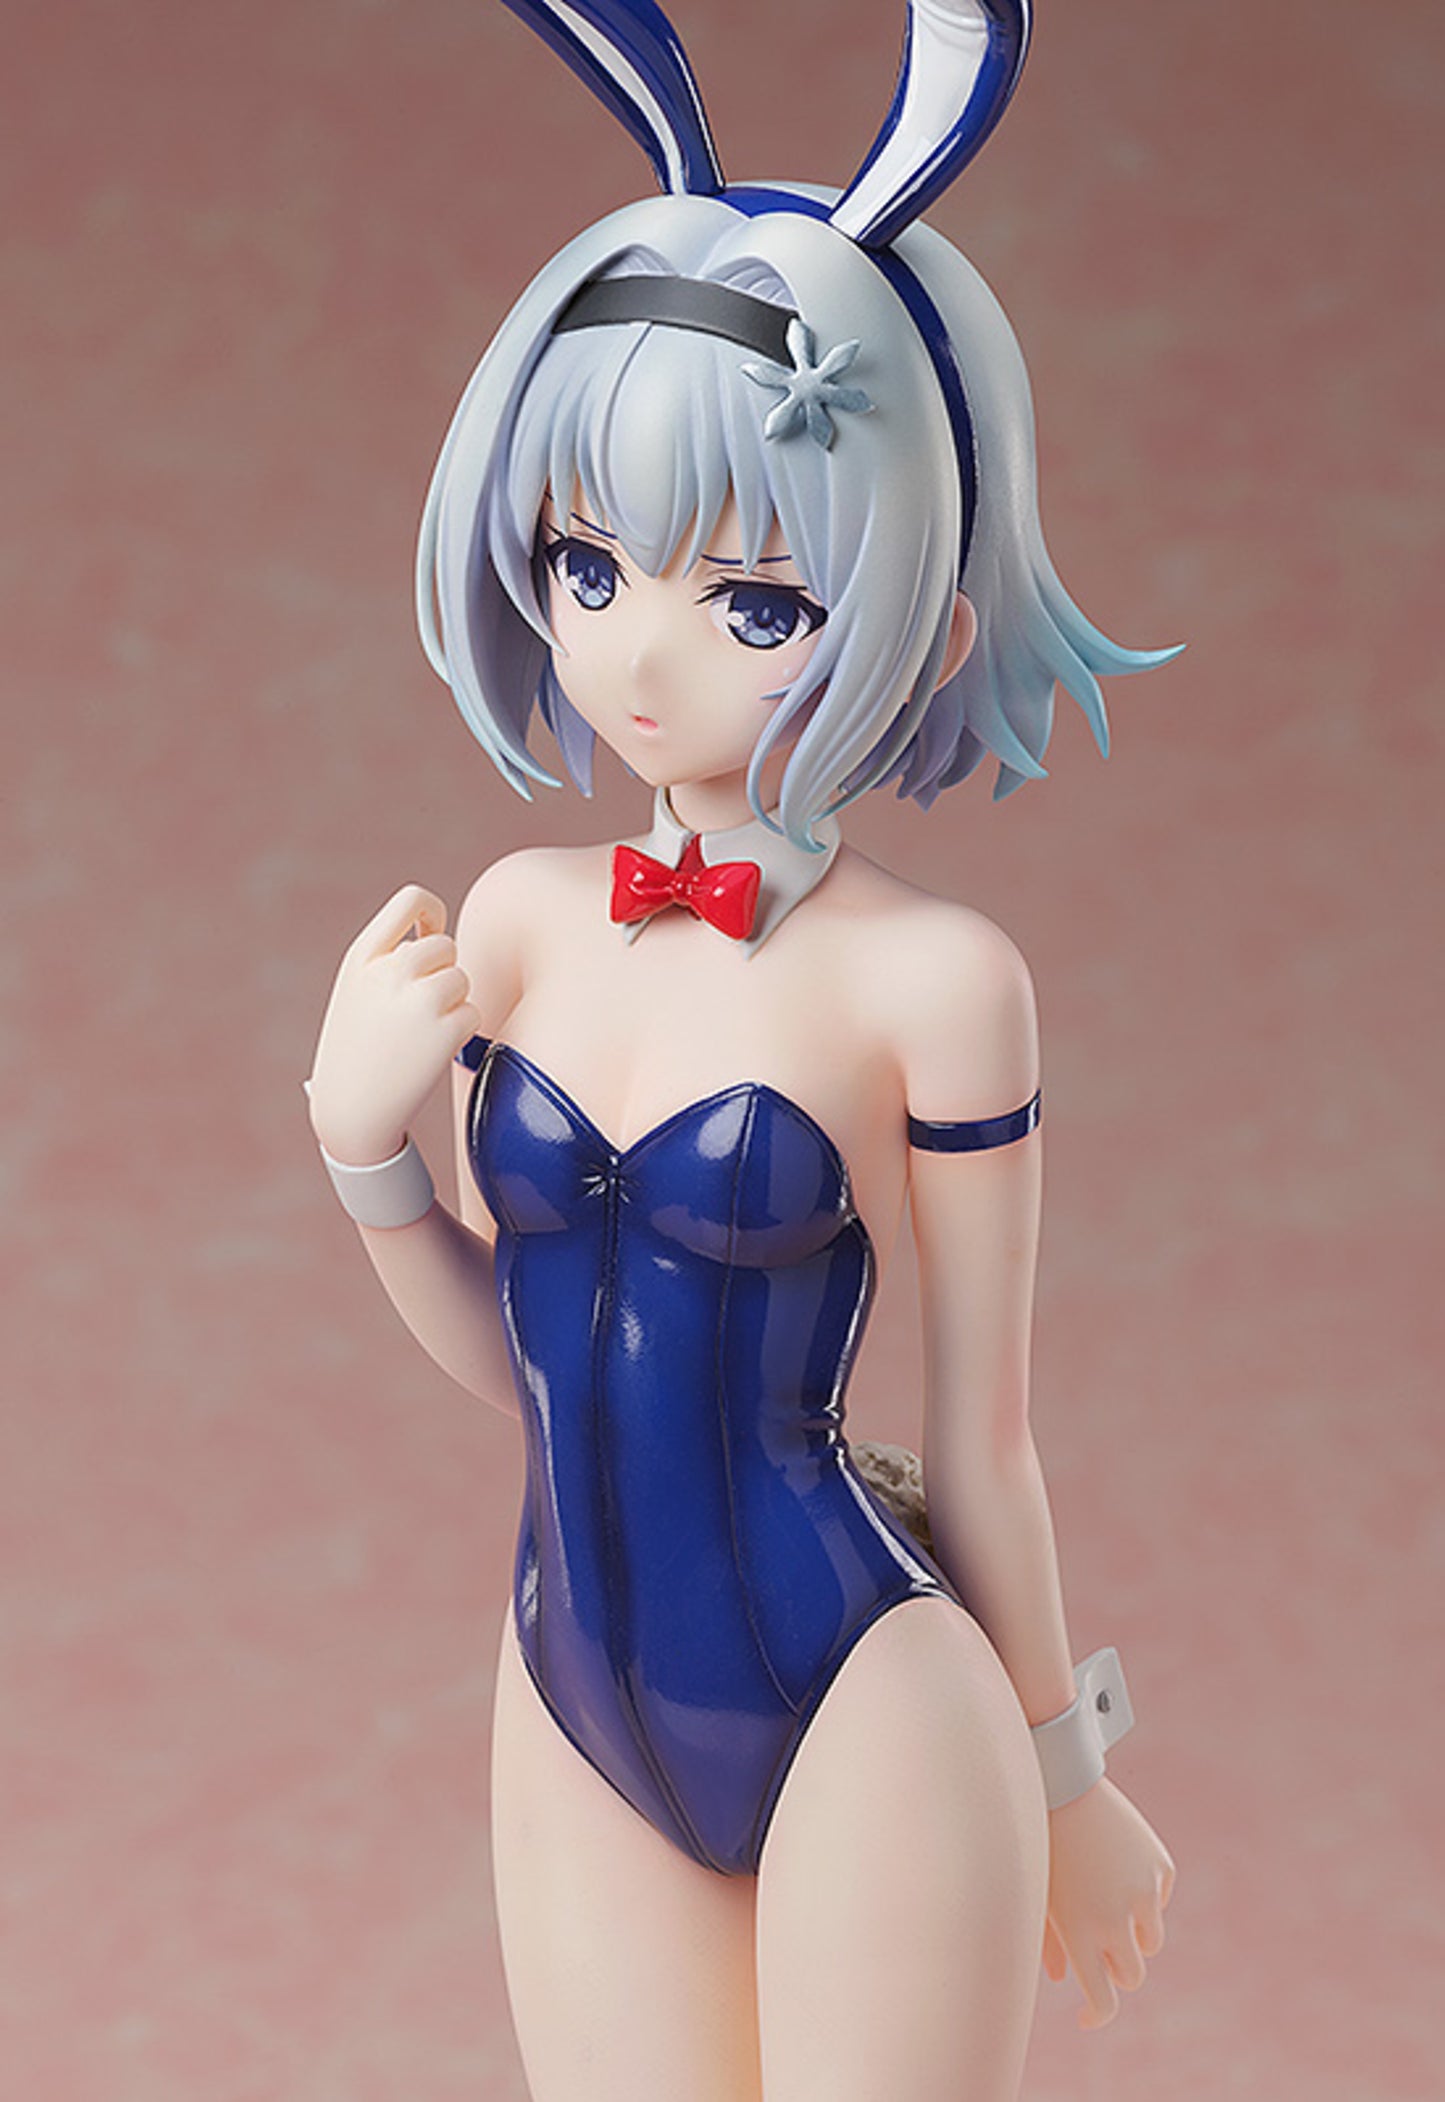 The Ryuo's Work Is Never Done - Ginko Sora Bare Leg Bunny Ver. Scale 1:4 Figure (Coming Soon)